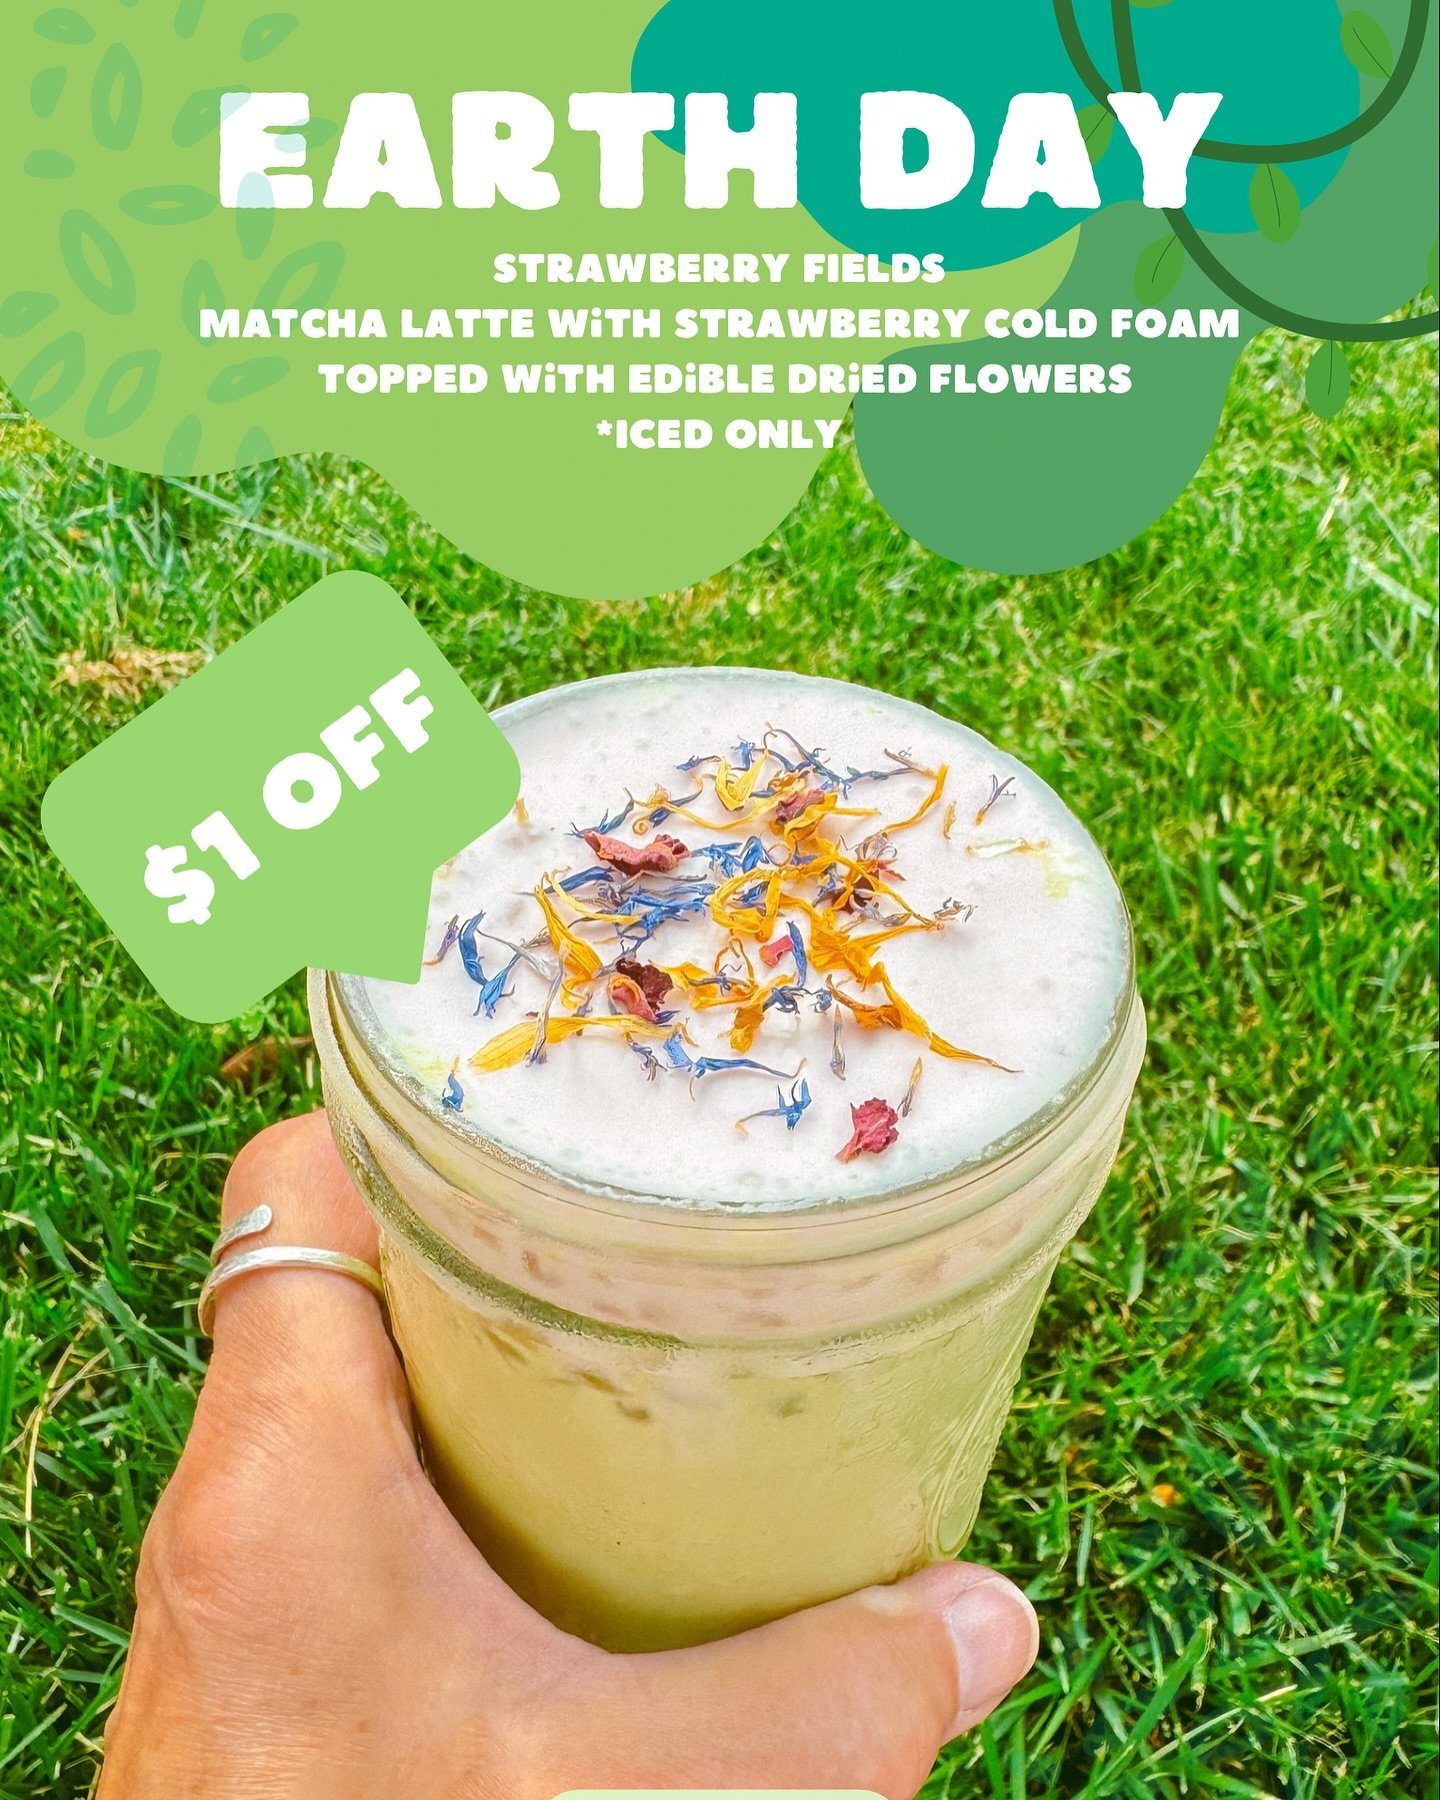 🌎 Happy Earth Day!

TODAY ONLY you can get one of our Strawberry Fields drink for a $1 off to celebrate the beautiful day!

🍓STRAWBERRY FIELDS DRINK 🍓
Matcha Latte with Strawberry Cold Foam
Topped with Edible Dried Flowers
*Iced Only

#clarksville